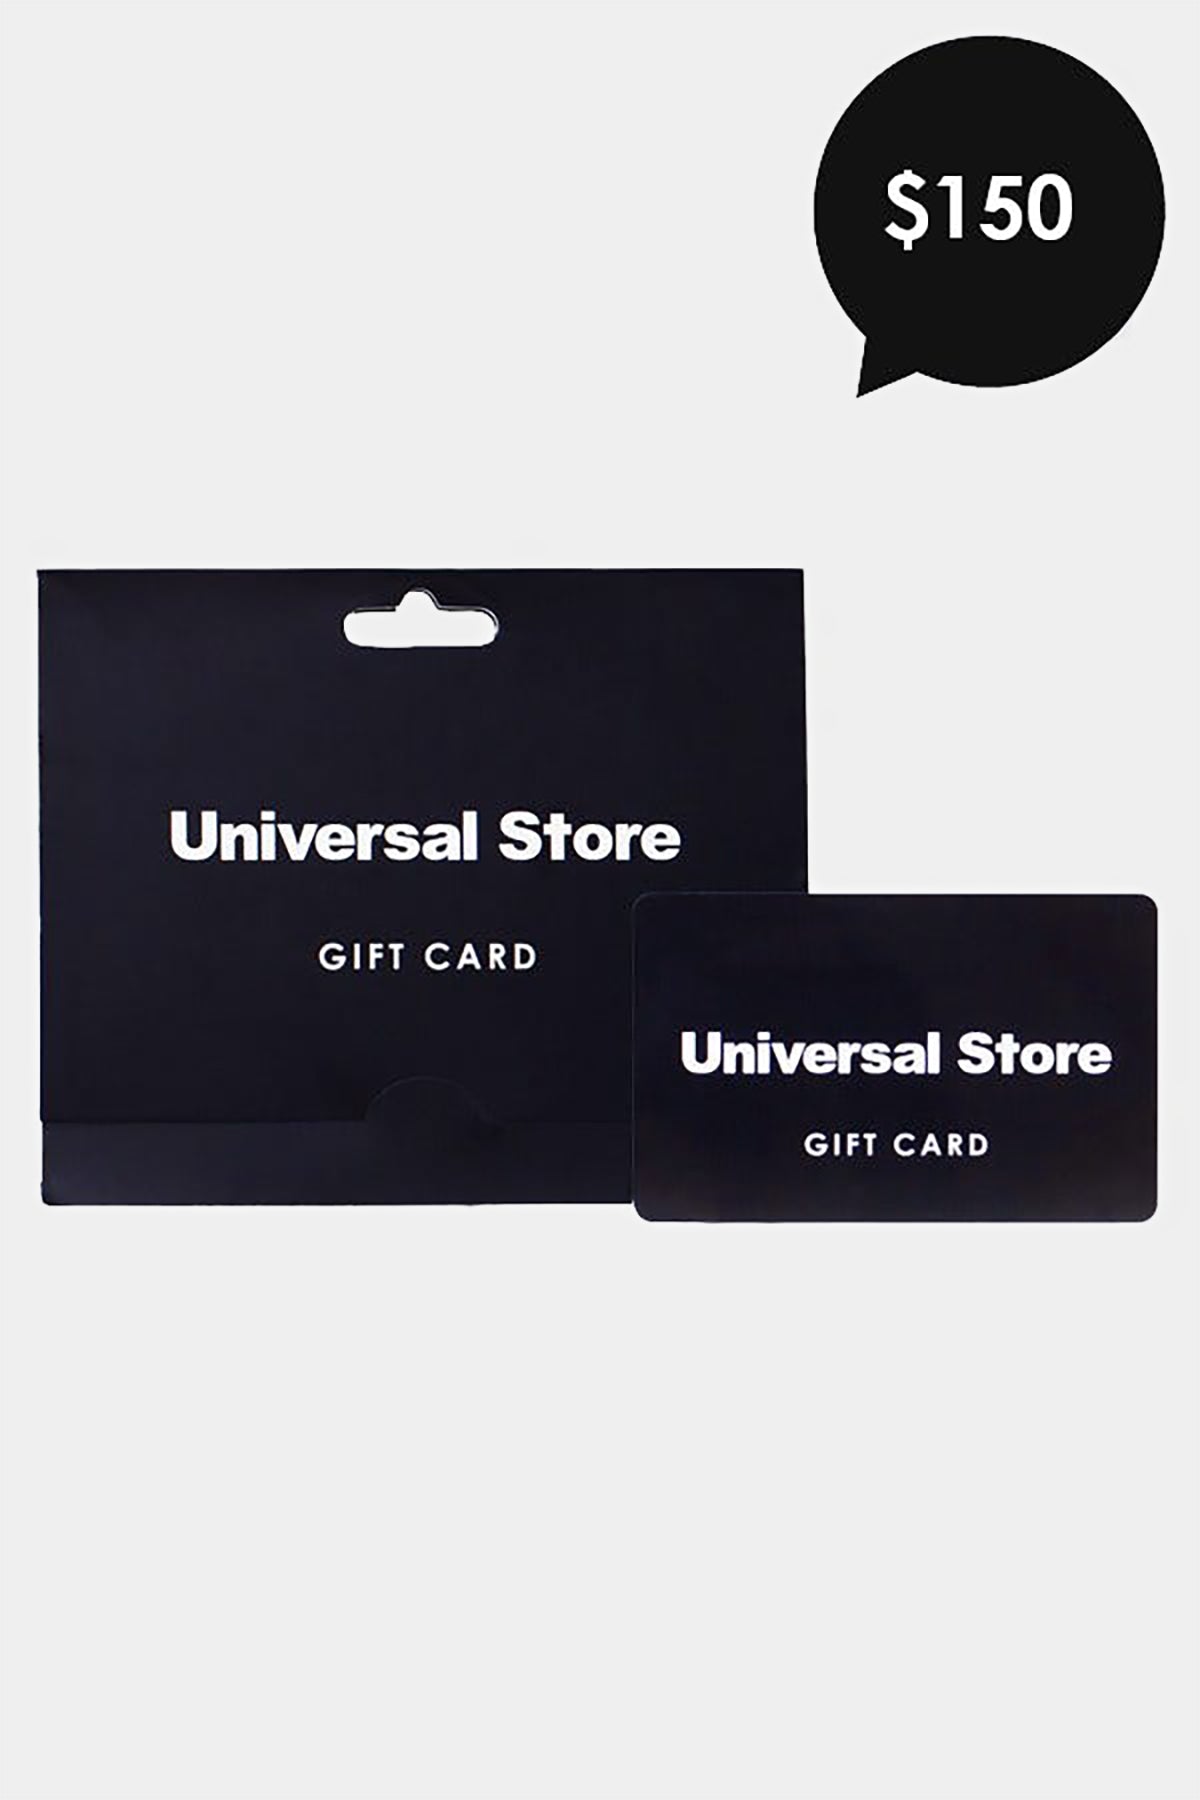 Universal Store $150 Gift Card